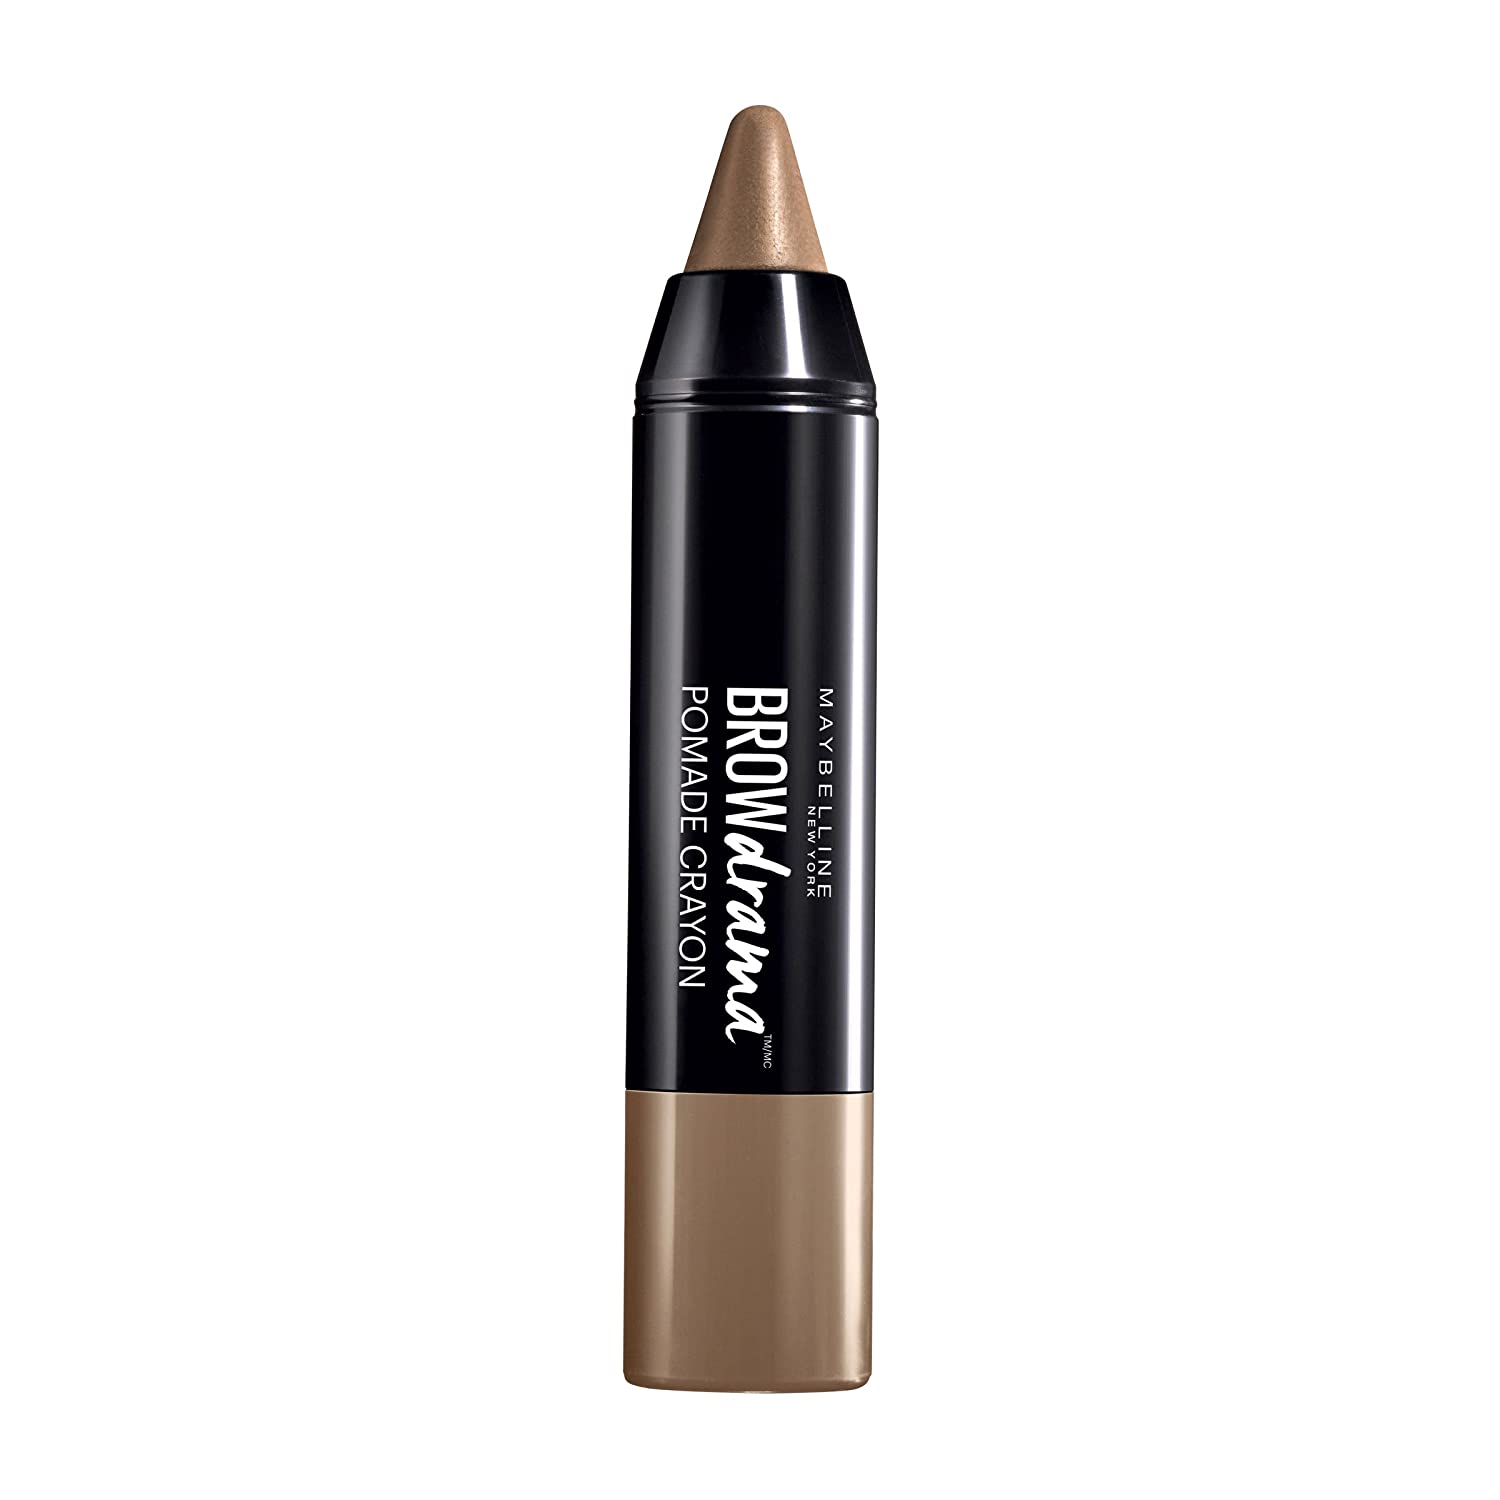 Maybelline Brow Drama Pomade Crayon in Dark Blonde Eyebrow Pencil for Shaping and Enhancing Eyebrow with Creamy Texture Highly Pigmented Easy to Use 1.1g, ‎dark